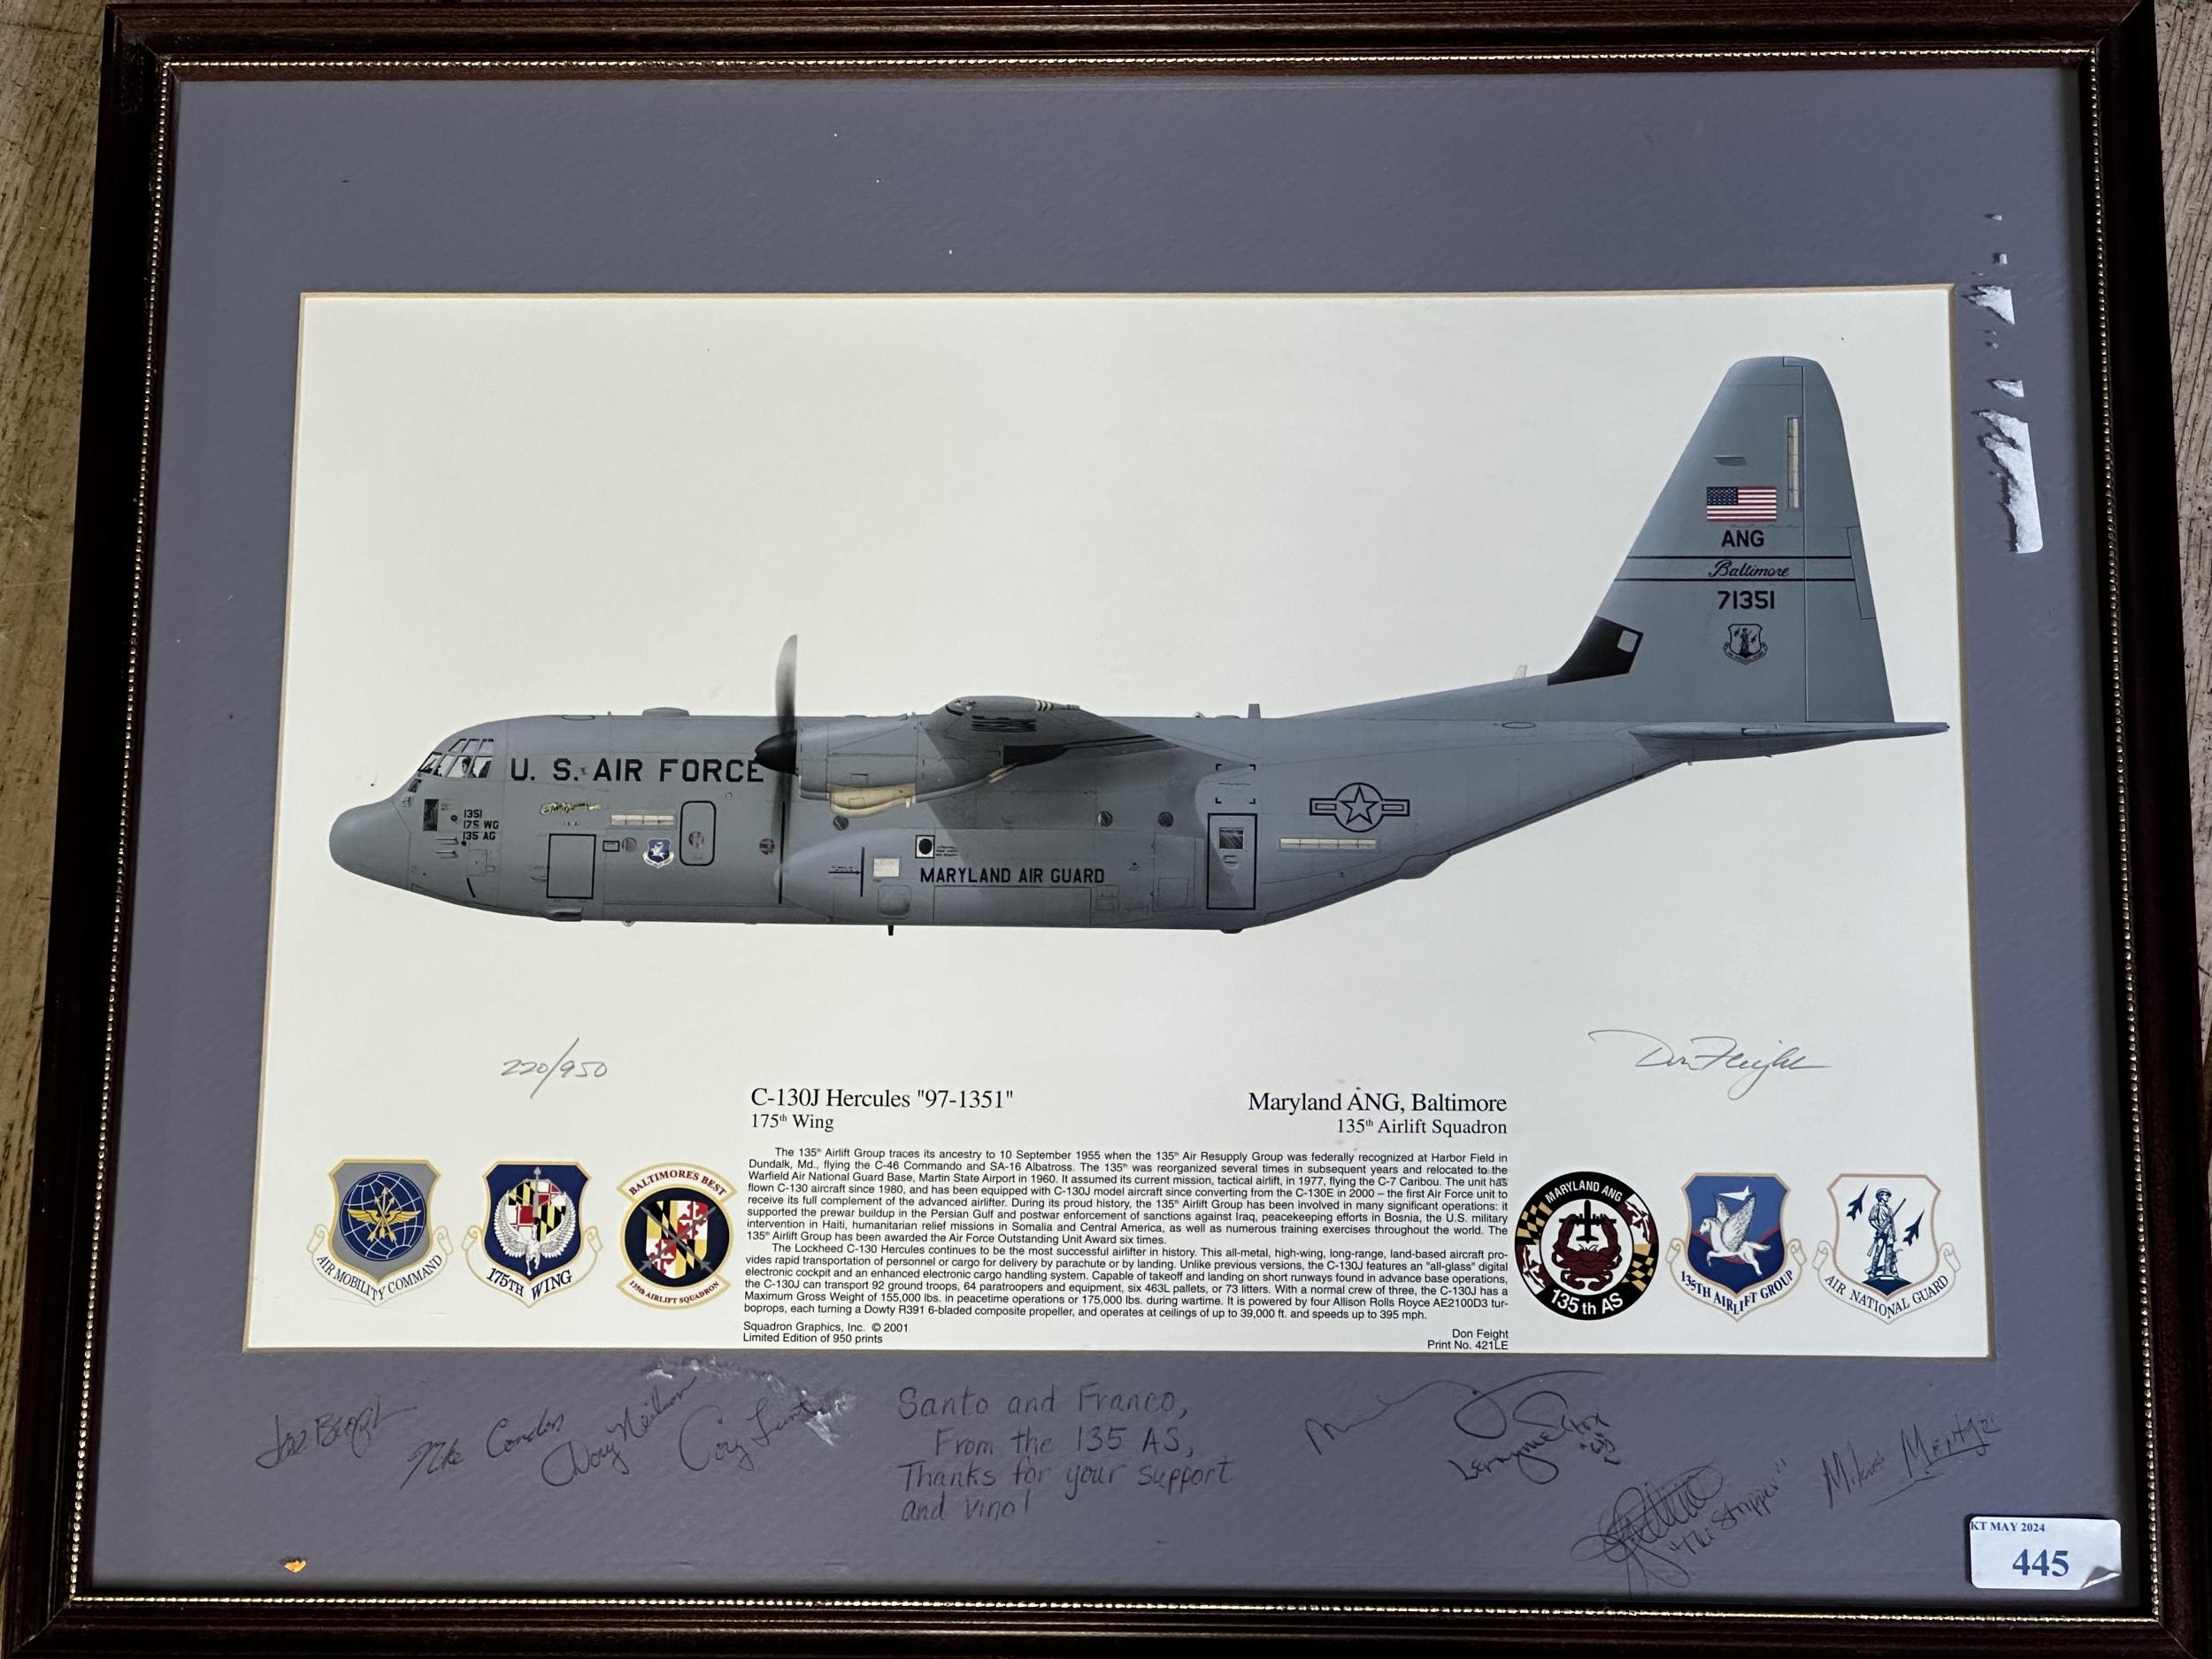 A framed and glazed picture of a US Air Force "C-130J Hercules "97-1351", with annotation and